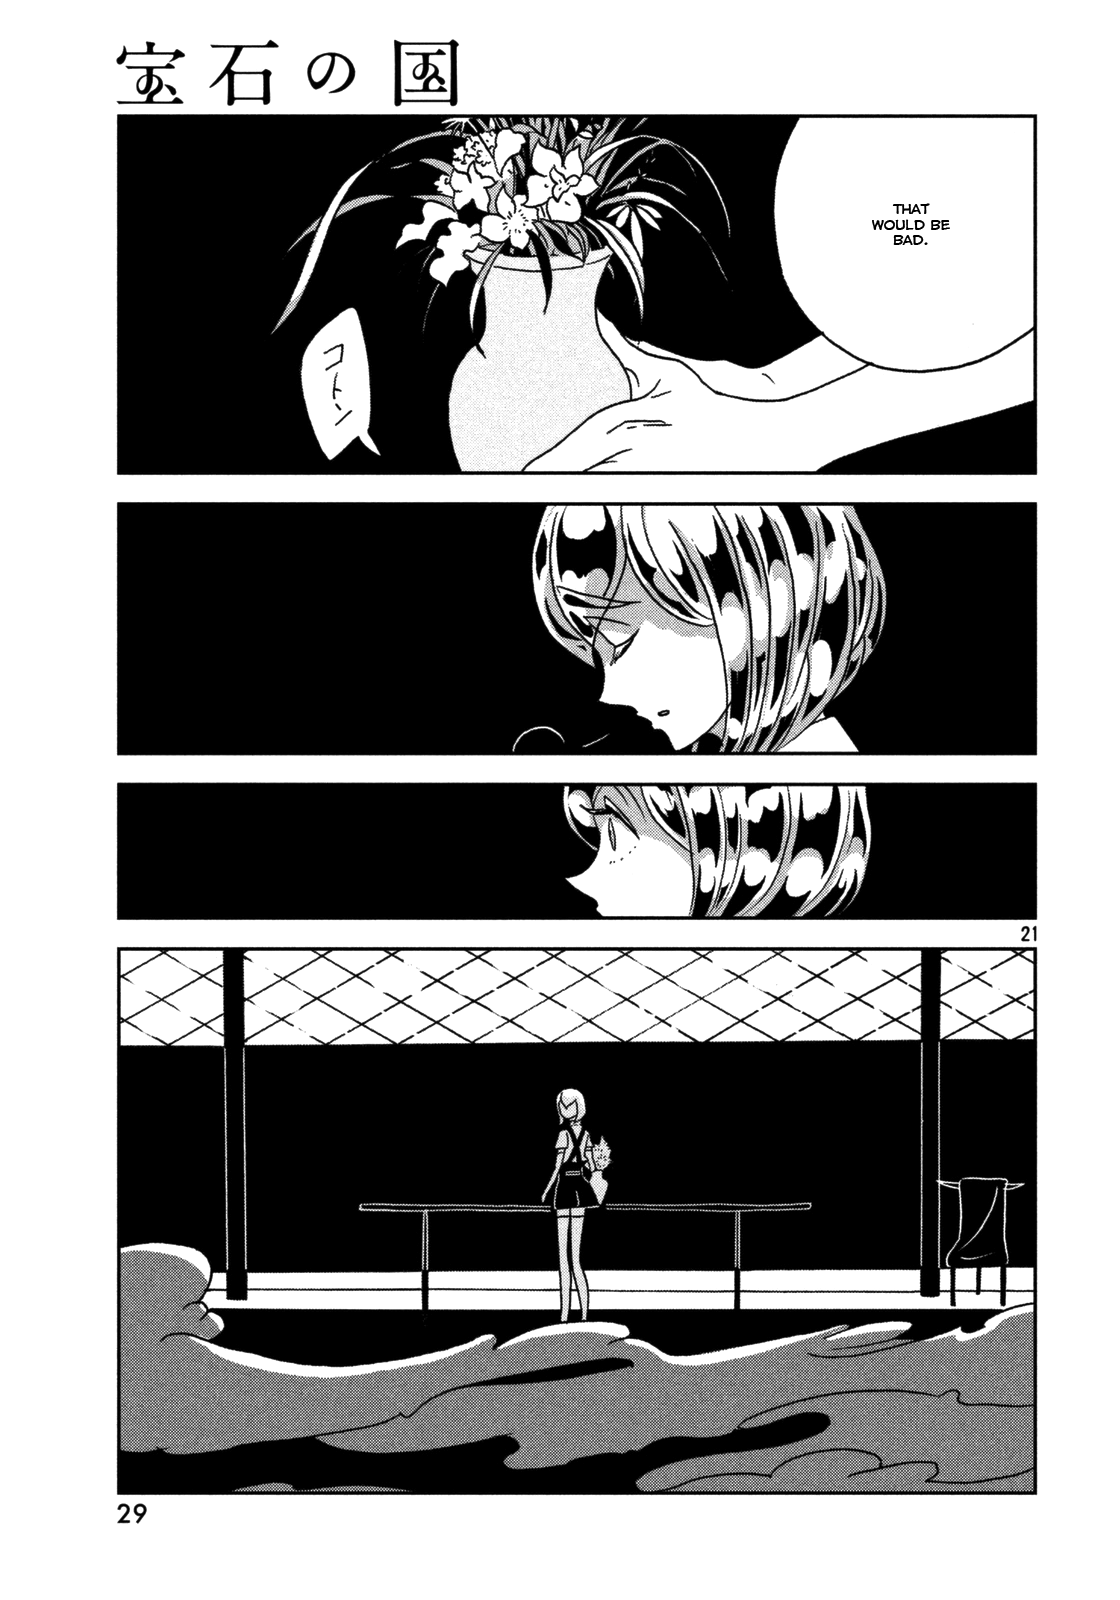 Land of the Lustrous, Chapter 24 image 22